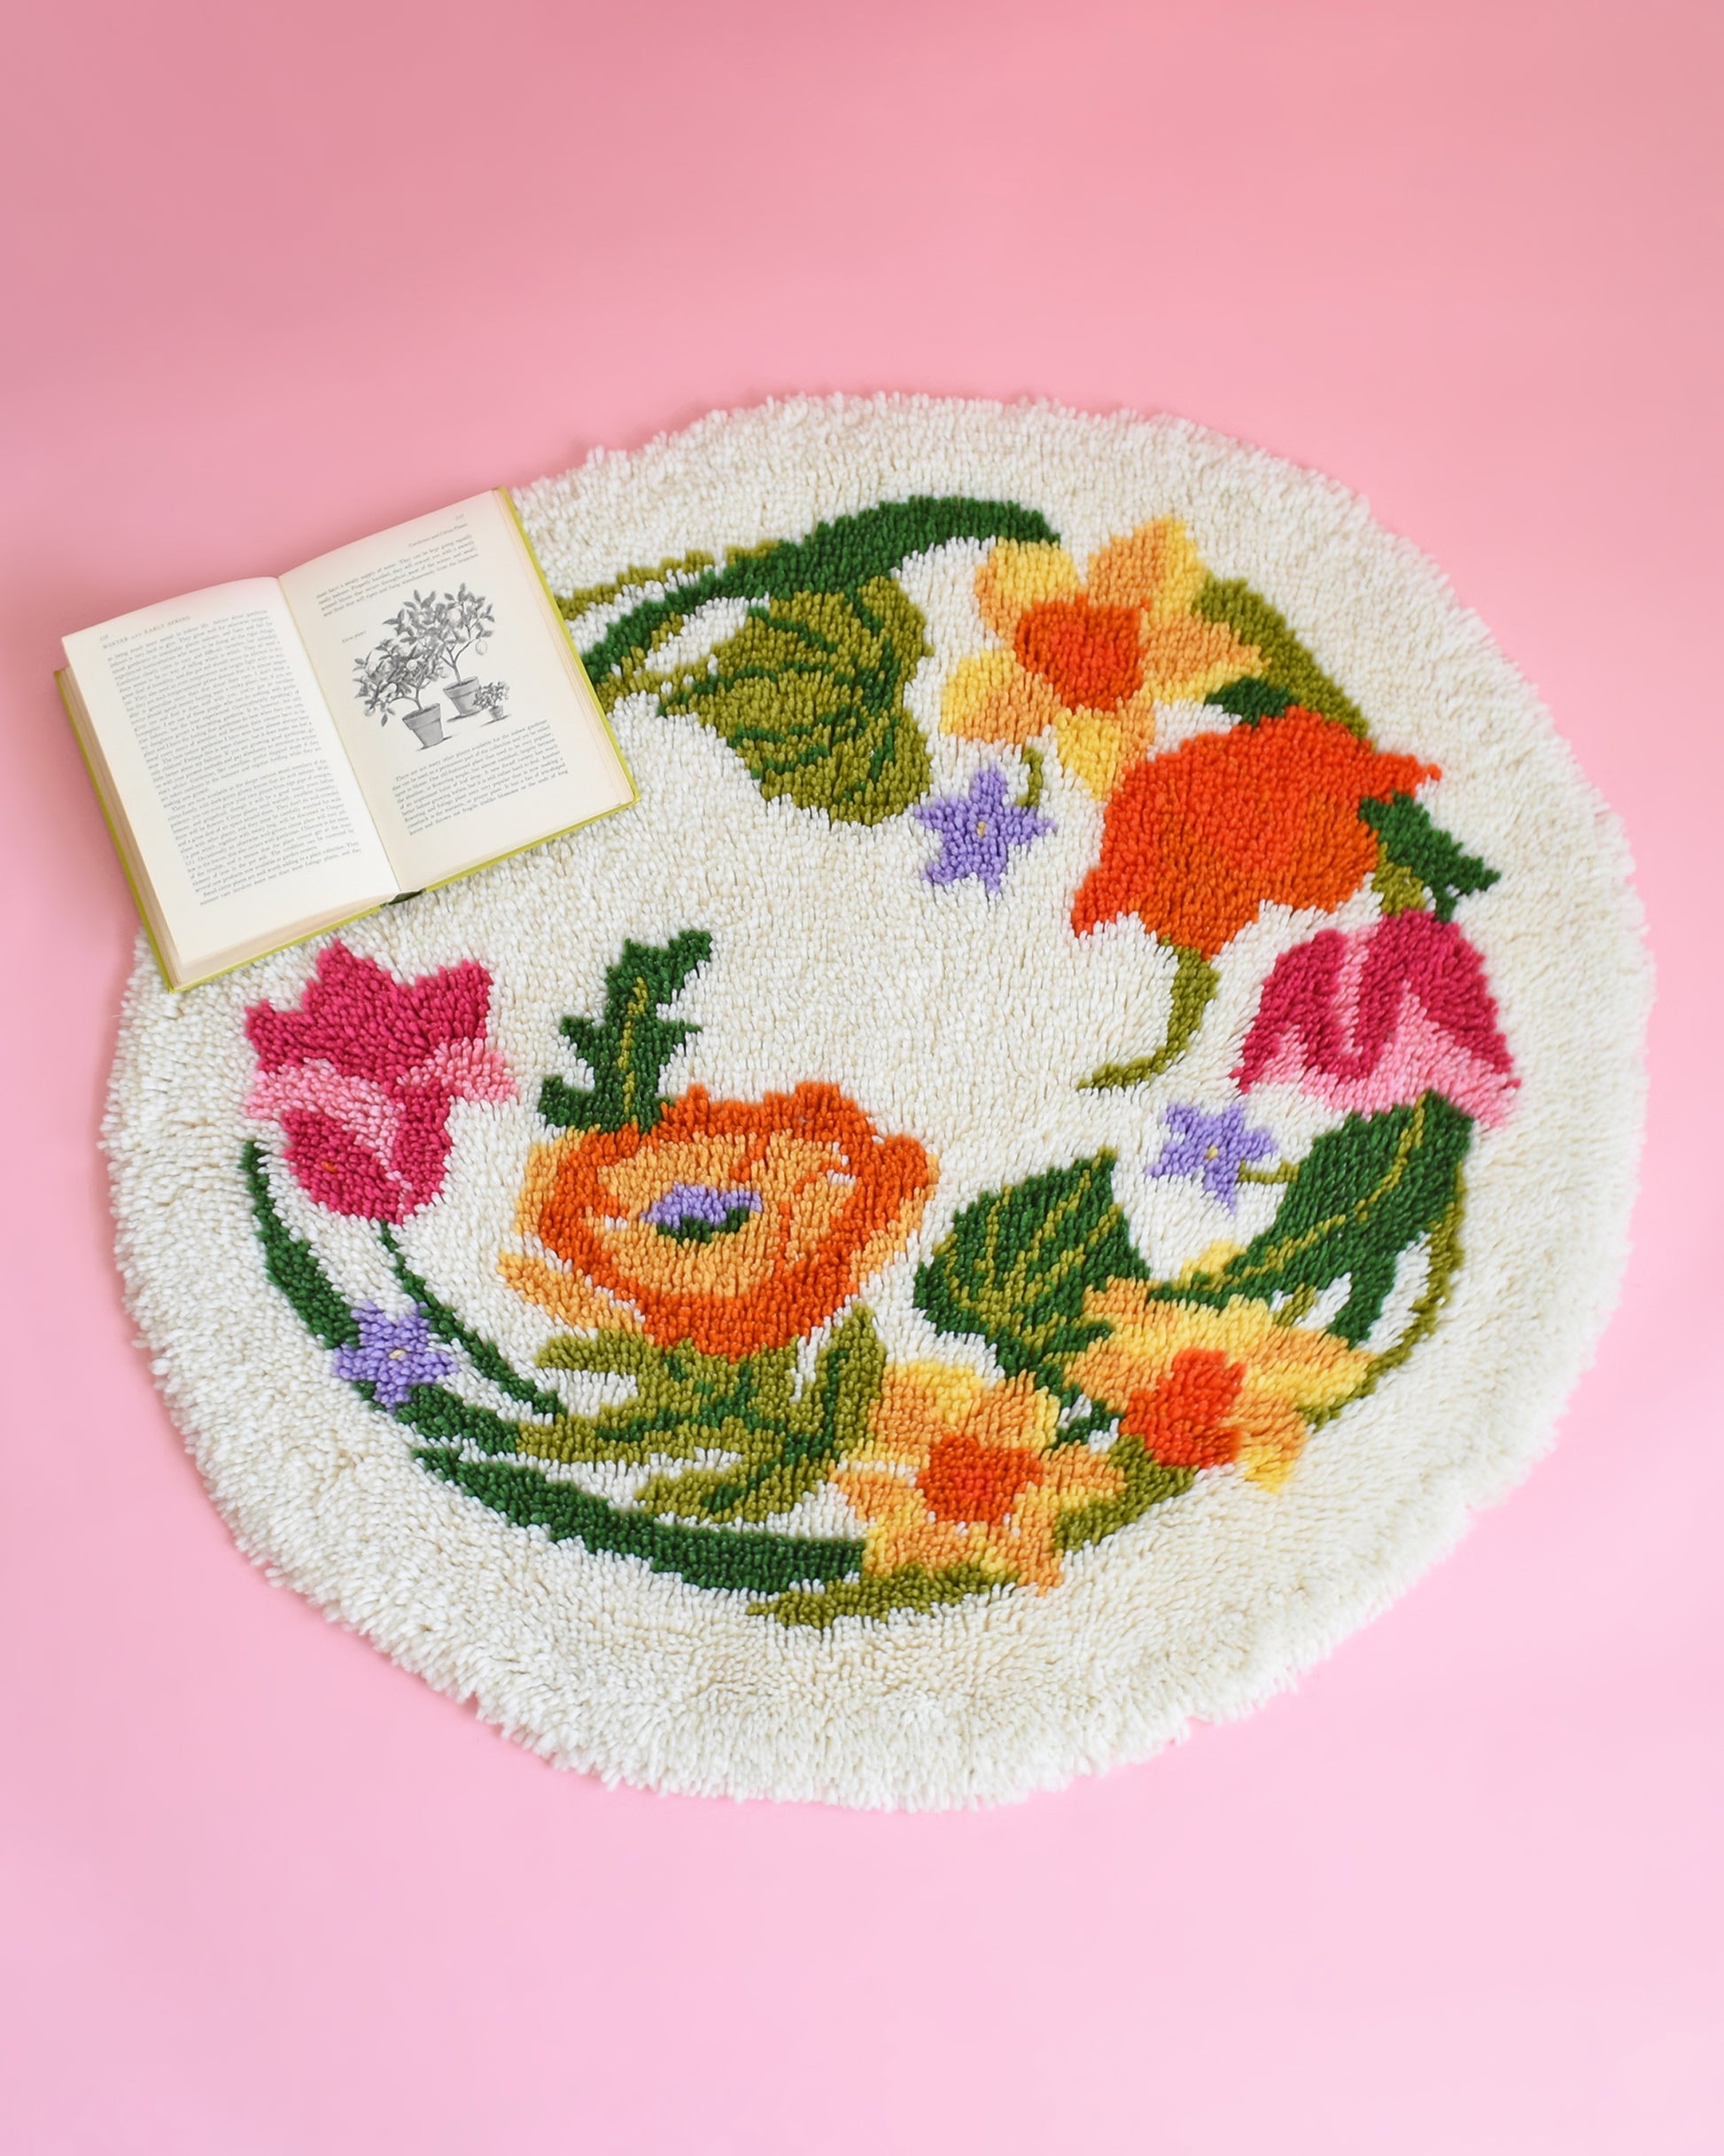 A vintage round floral latch hook rug that has cream white shaggy acrylic with a colorful floral motif in pinks, orange, yellow, purple and greens. The rug is on a pink background and has an open book on it for scale.